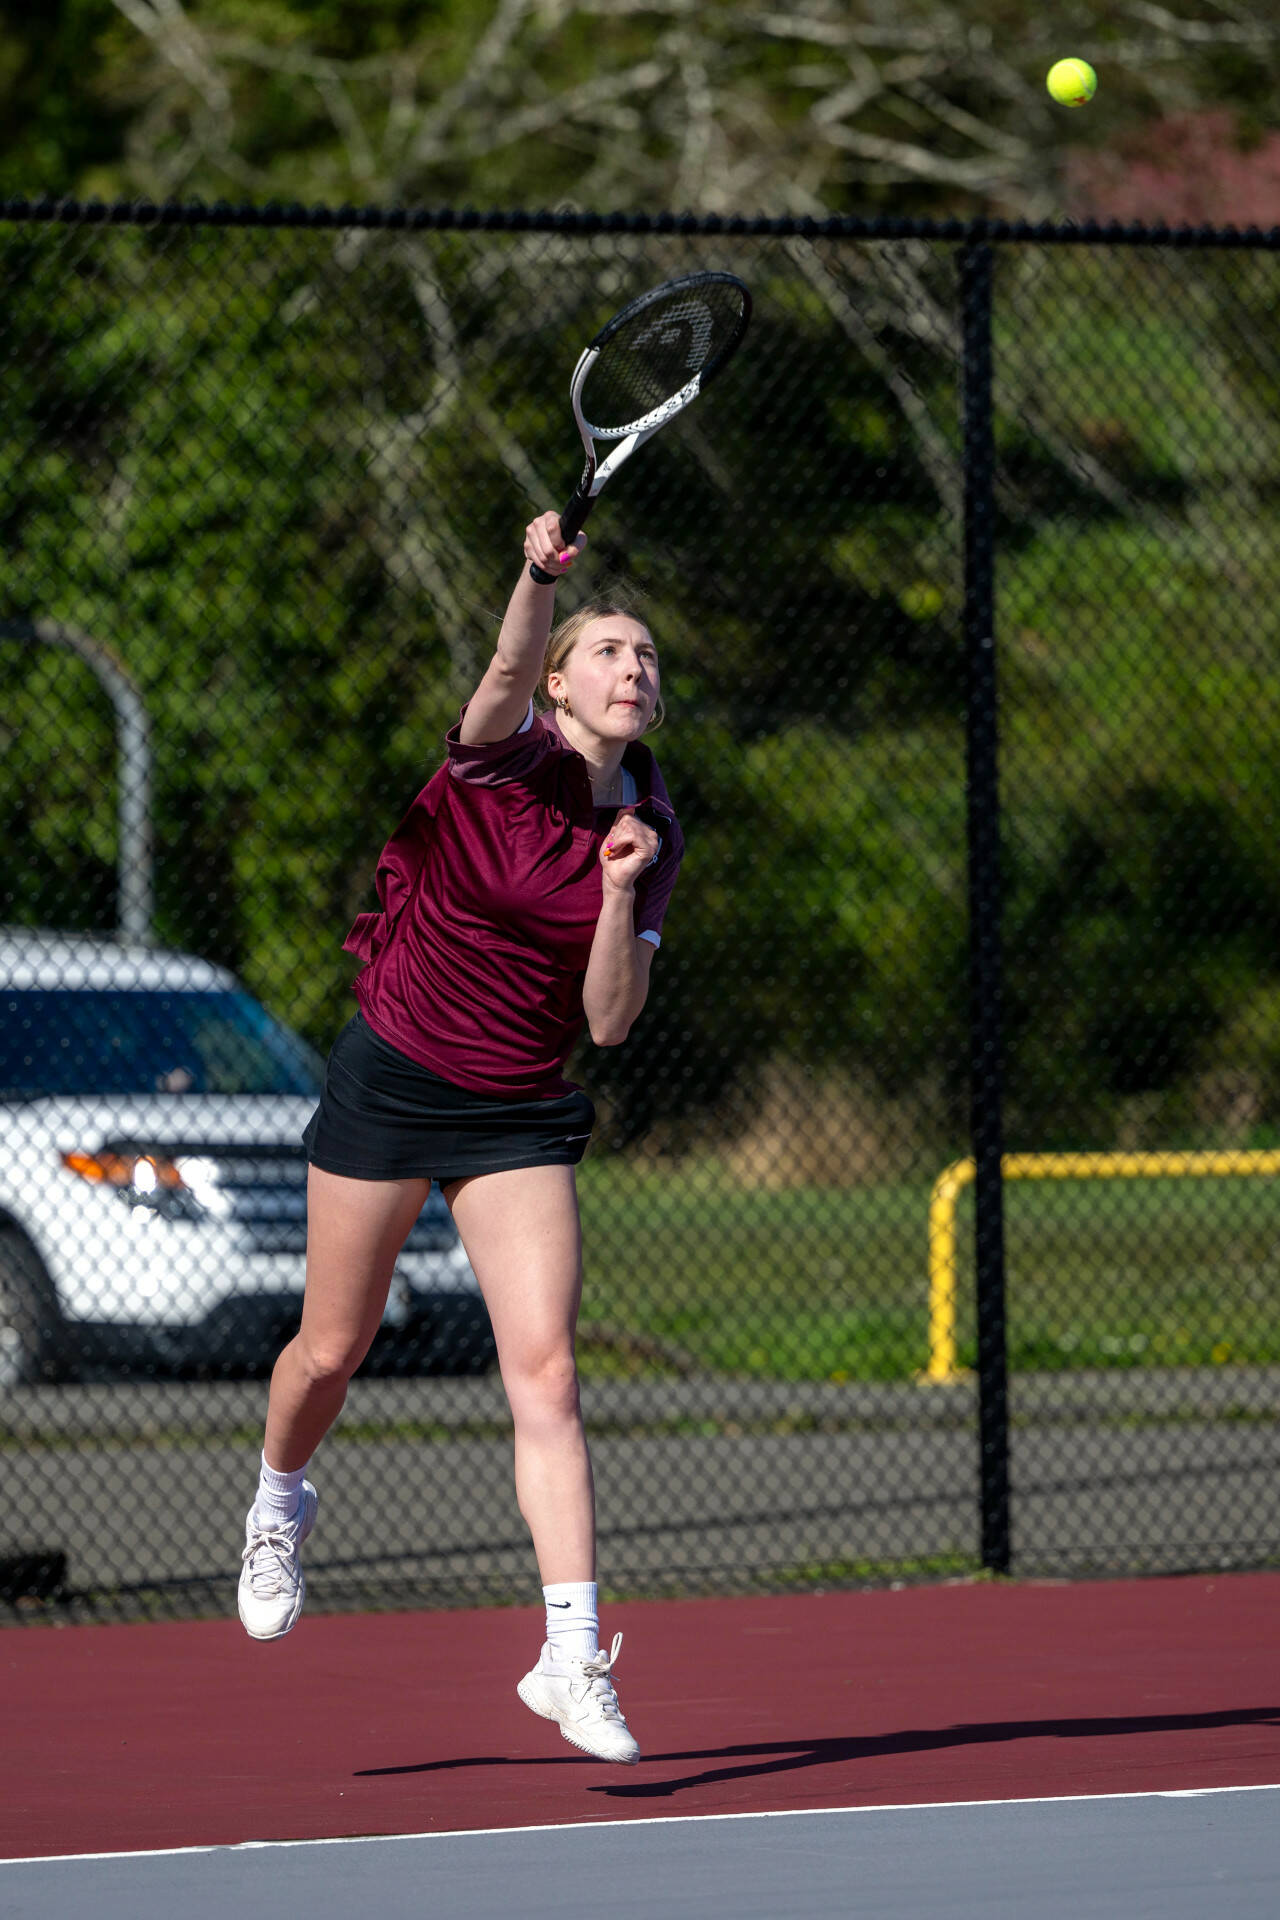 PHOTO BY FOREST WORGUM Montesano’s Karissa Otterstetter serves during a 6-0, 6-0 singles-match victory over Hoquiam’s Ashlynn Amsbury on Tuesday in Montesano.